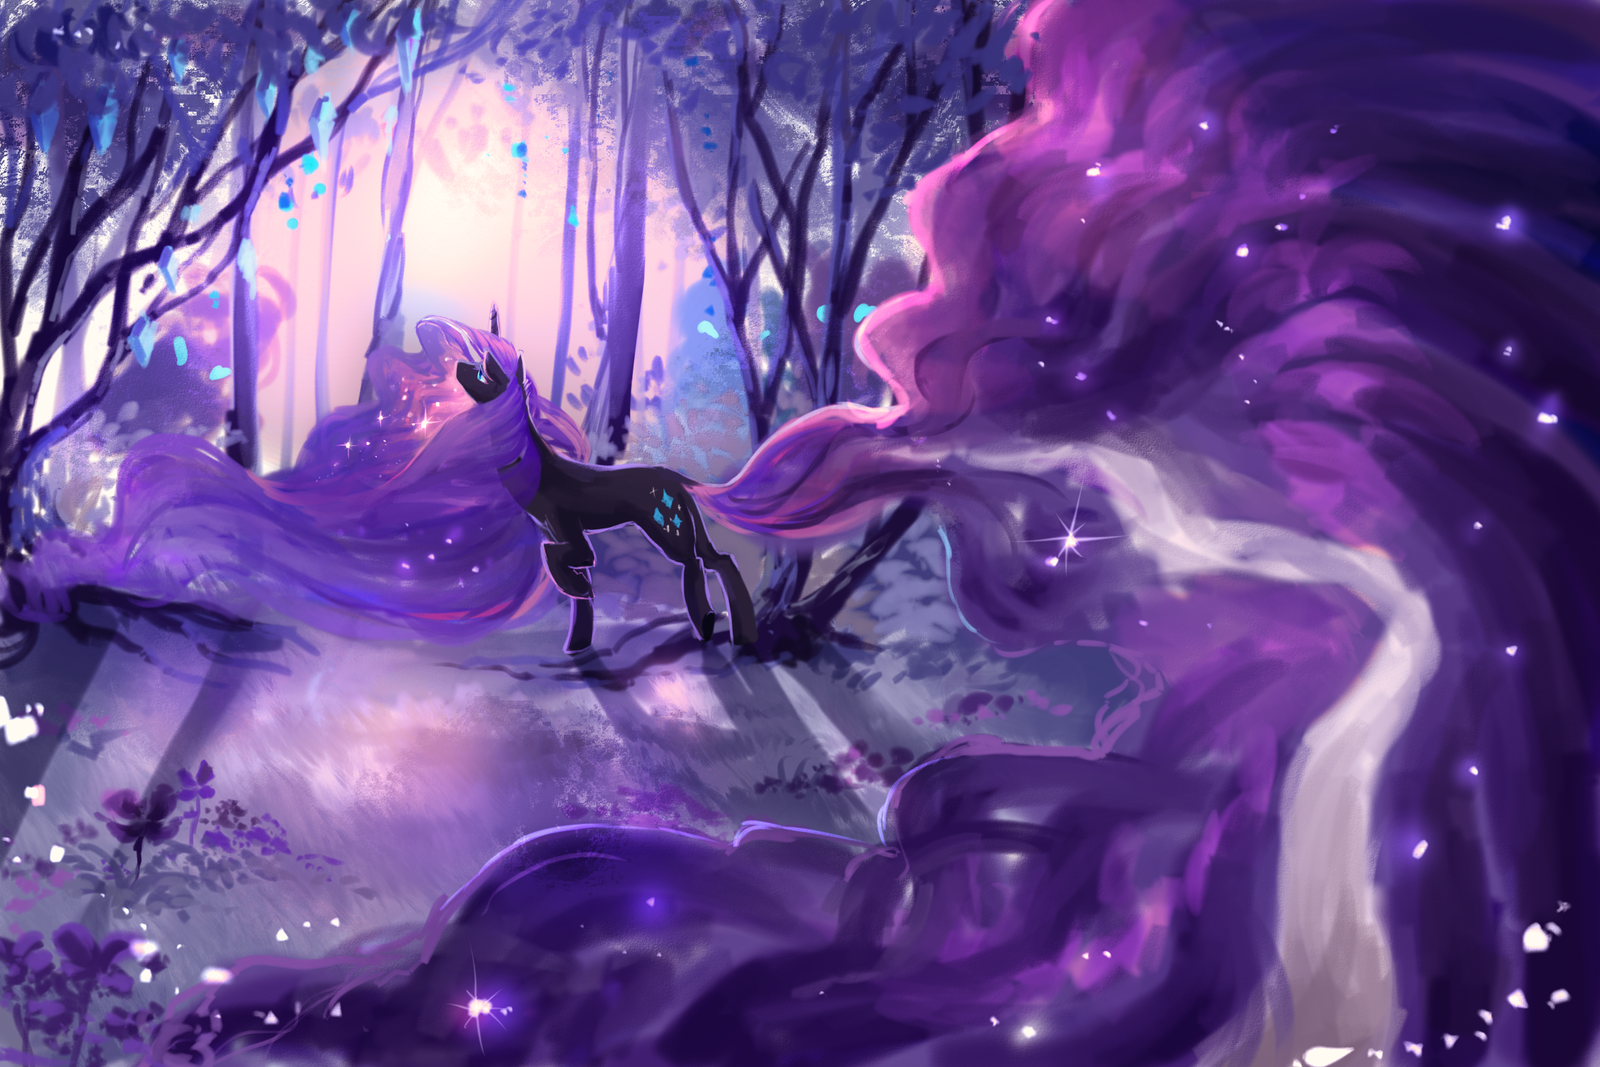 MLP A: Allure of nightmares by AquaGalaxy